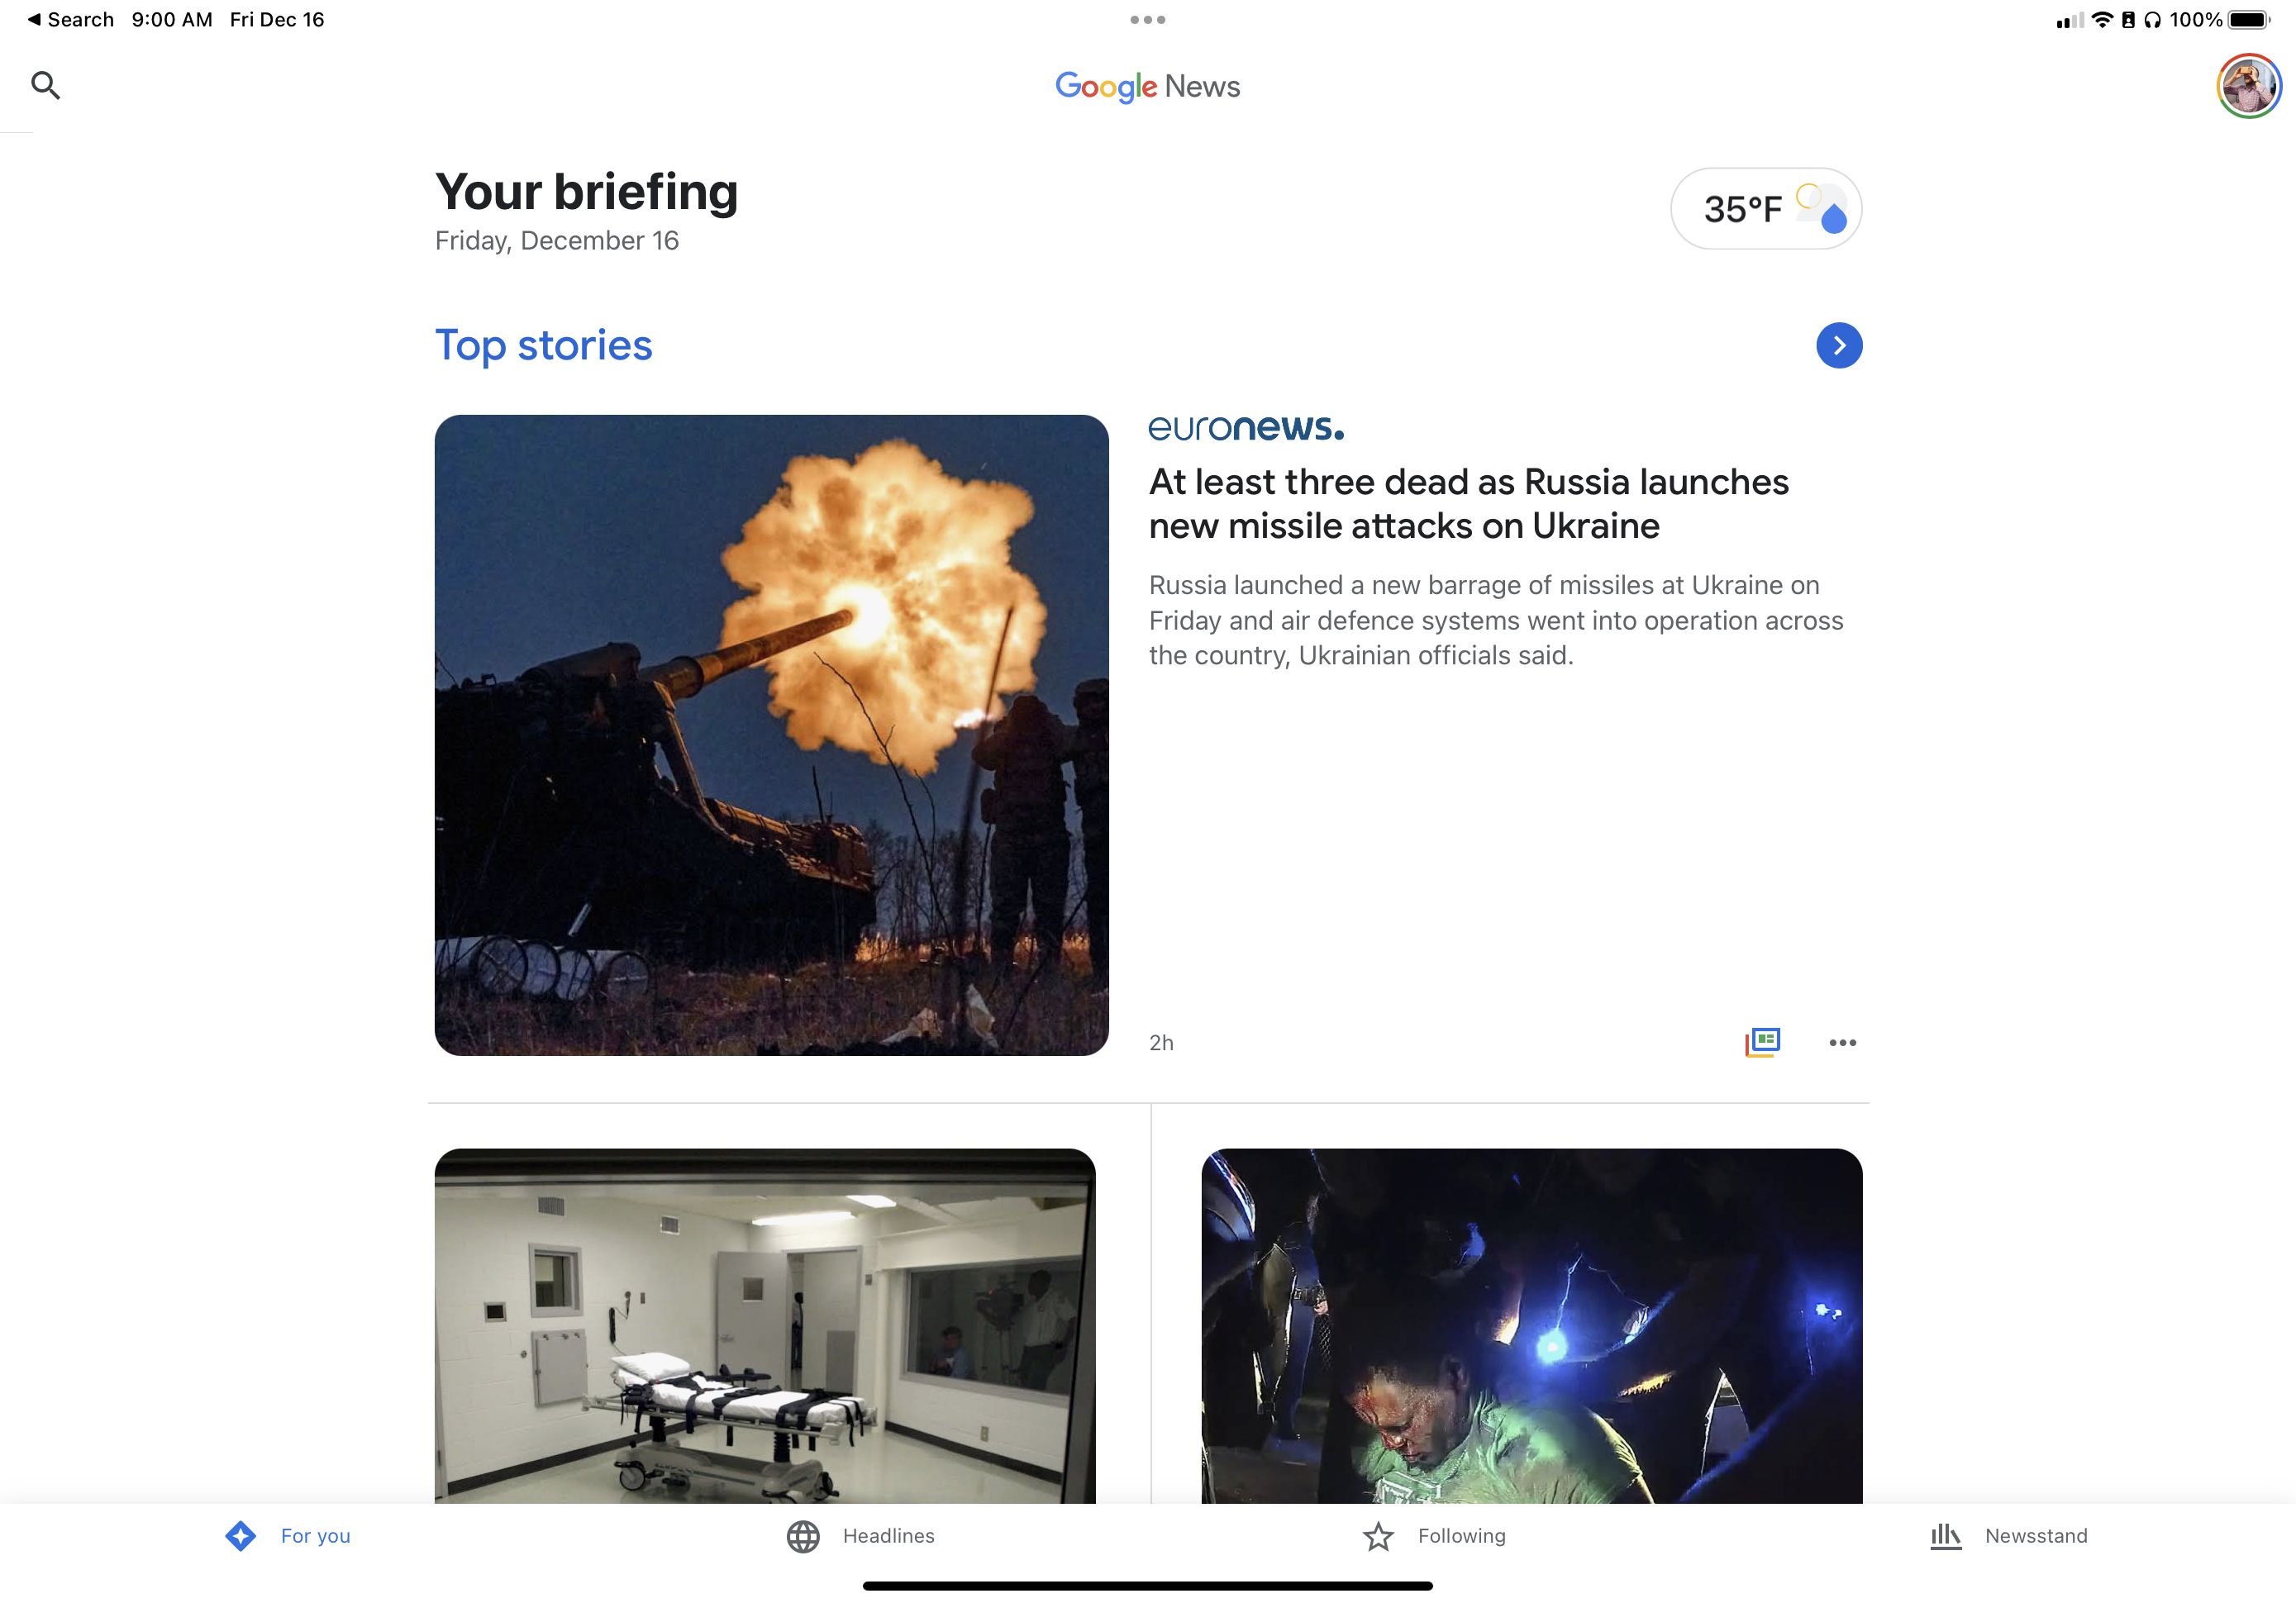 Google News is similar to Apple News, but better for shorter blogs and local events. It is also available in more places.